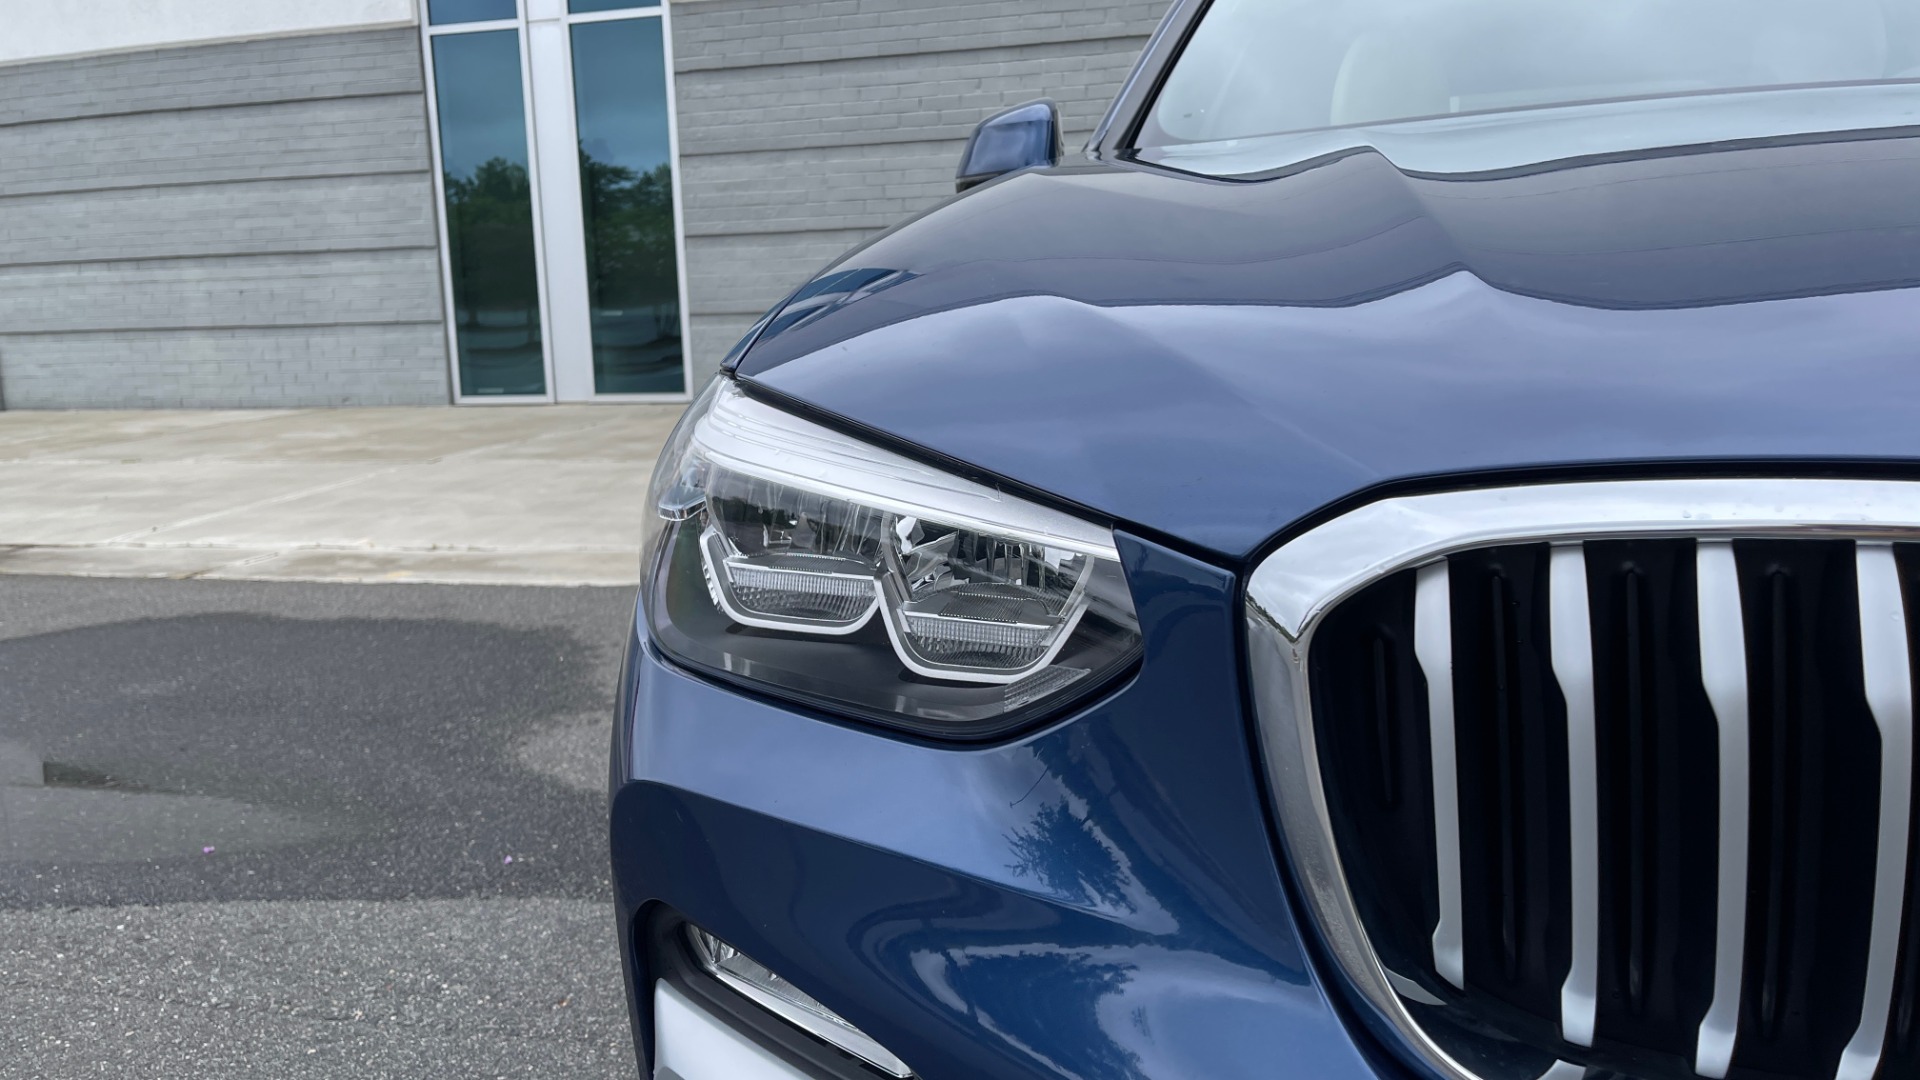 Used 2019 BMW X3 SDRIVE30I / NAV / PANO-ROOF / DRVR ASST / 19IN WHEELS / REARVIEW for sale Sold at Formula Imports in Charlotte NC 28227 12